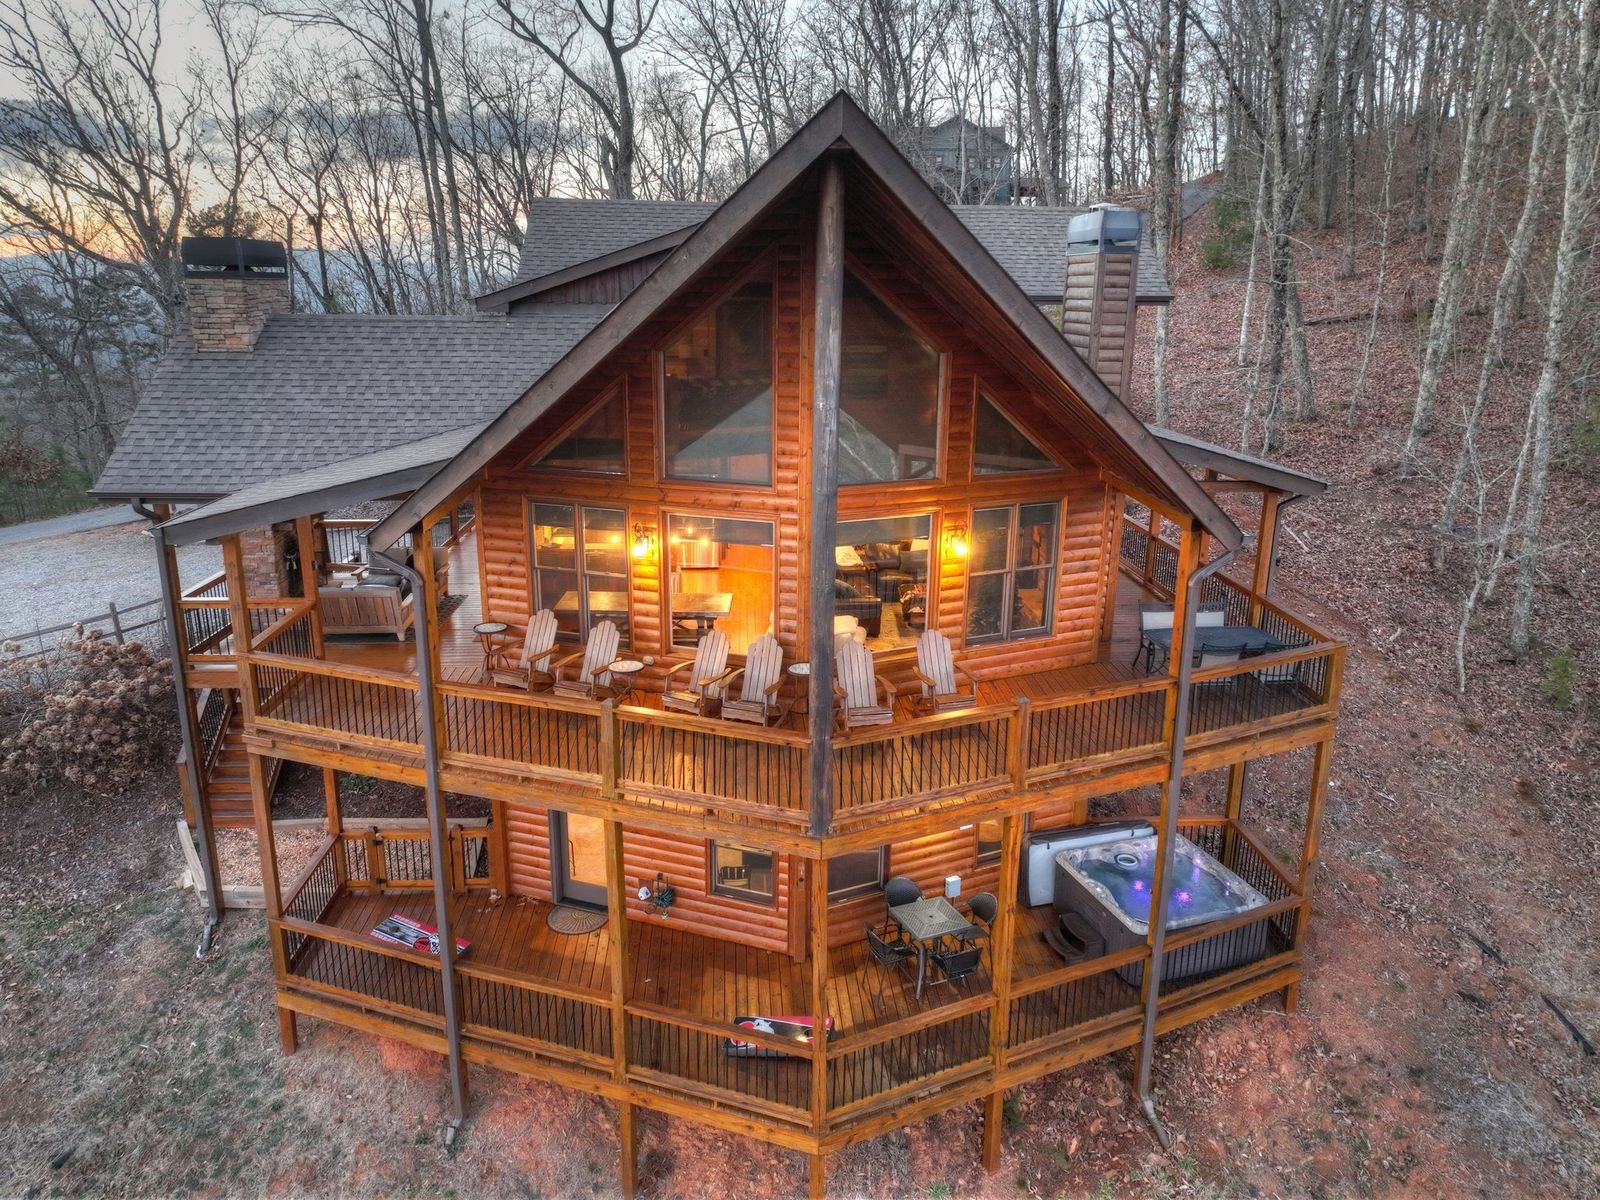 Skyfall Cabin Rental is a luxury vacation home with a Stunning